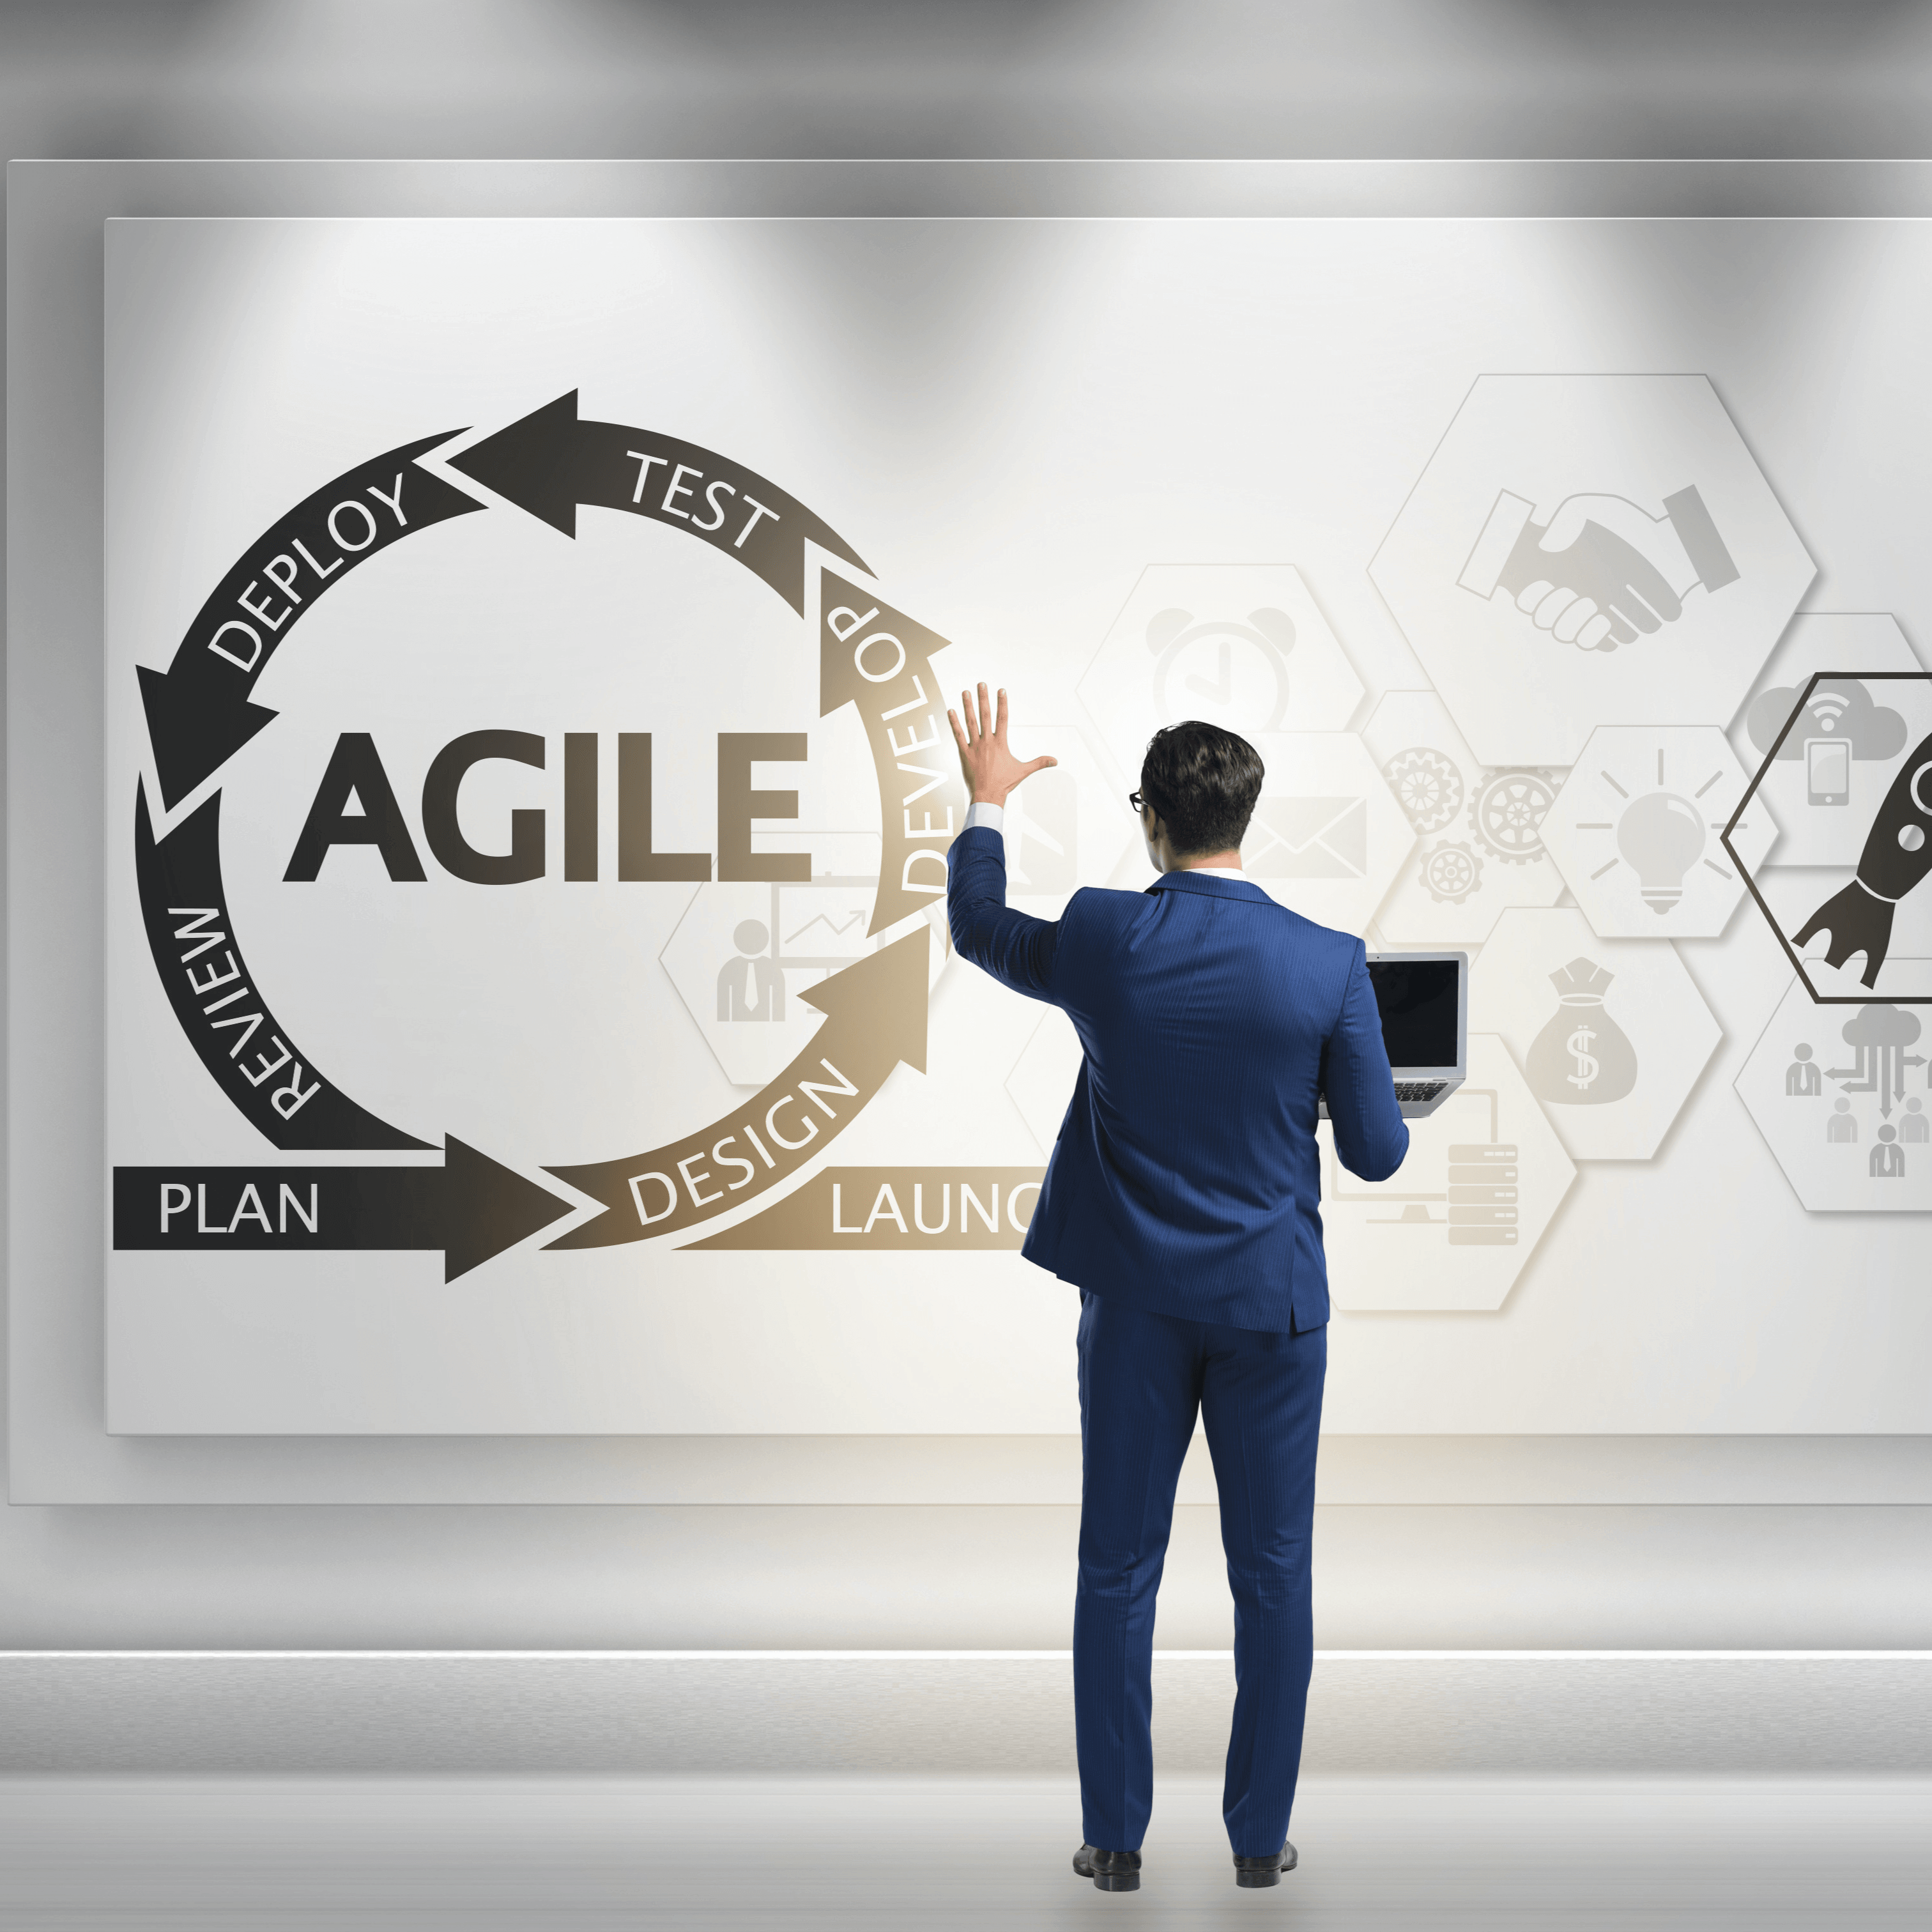 Agile Essentials training by why academy!: learn Agile concepts, its mindset, values & principles, with a spotlight on Scrum